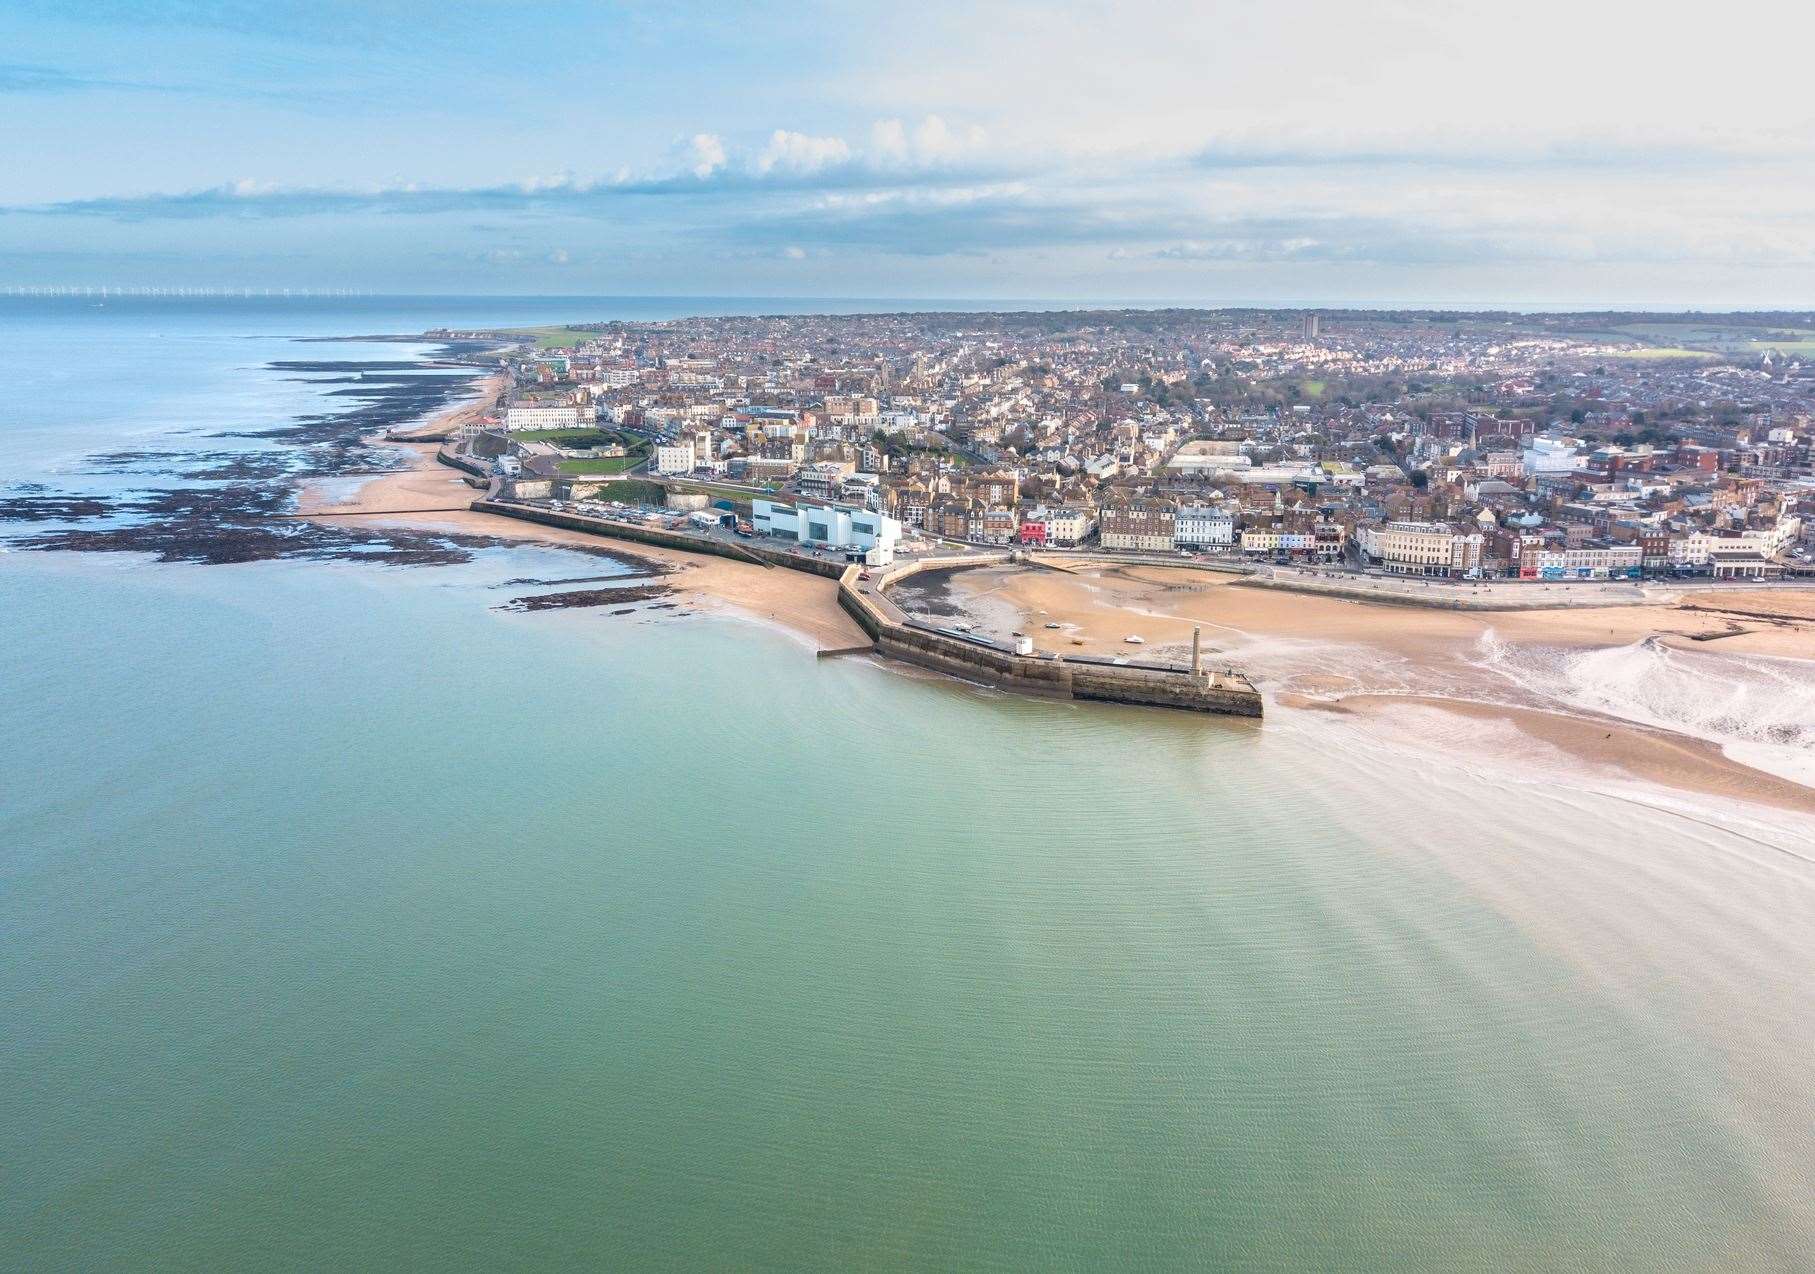 Margate has seen a sharp rise in Airbnb rentals since its revival